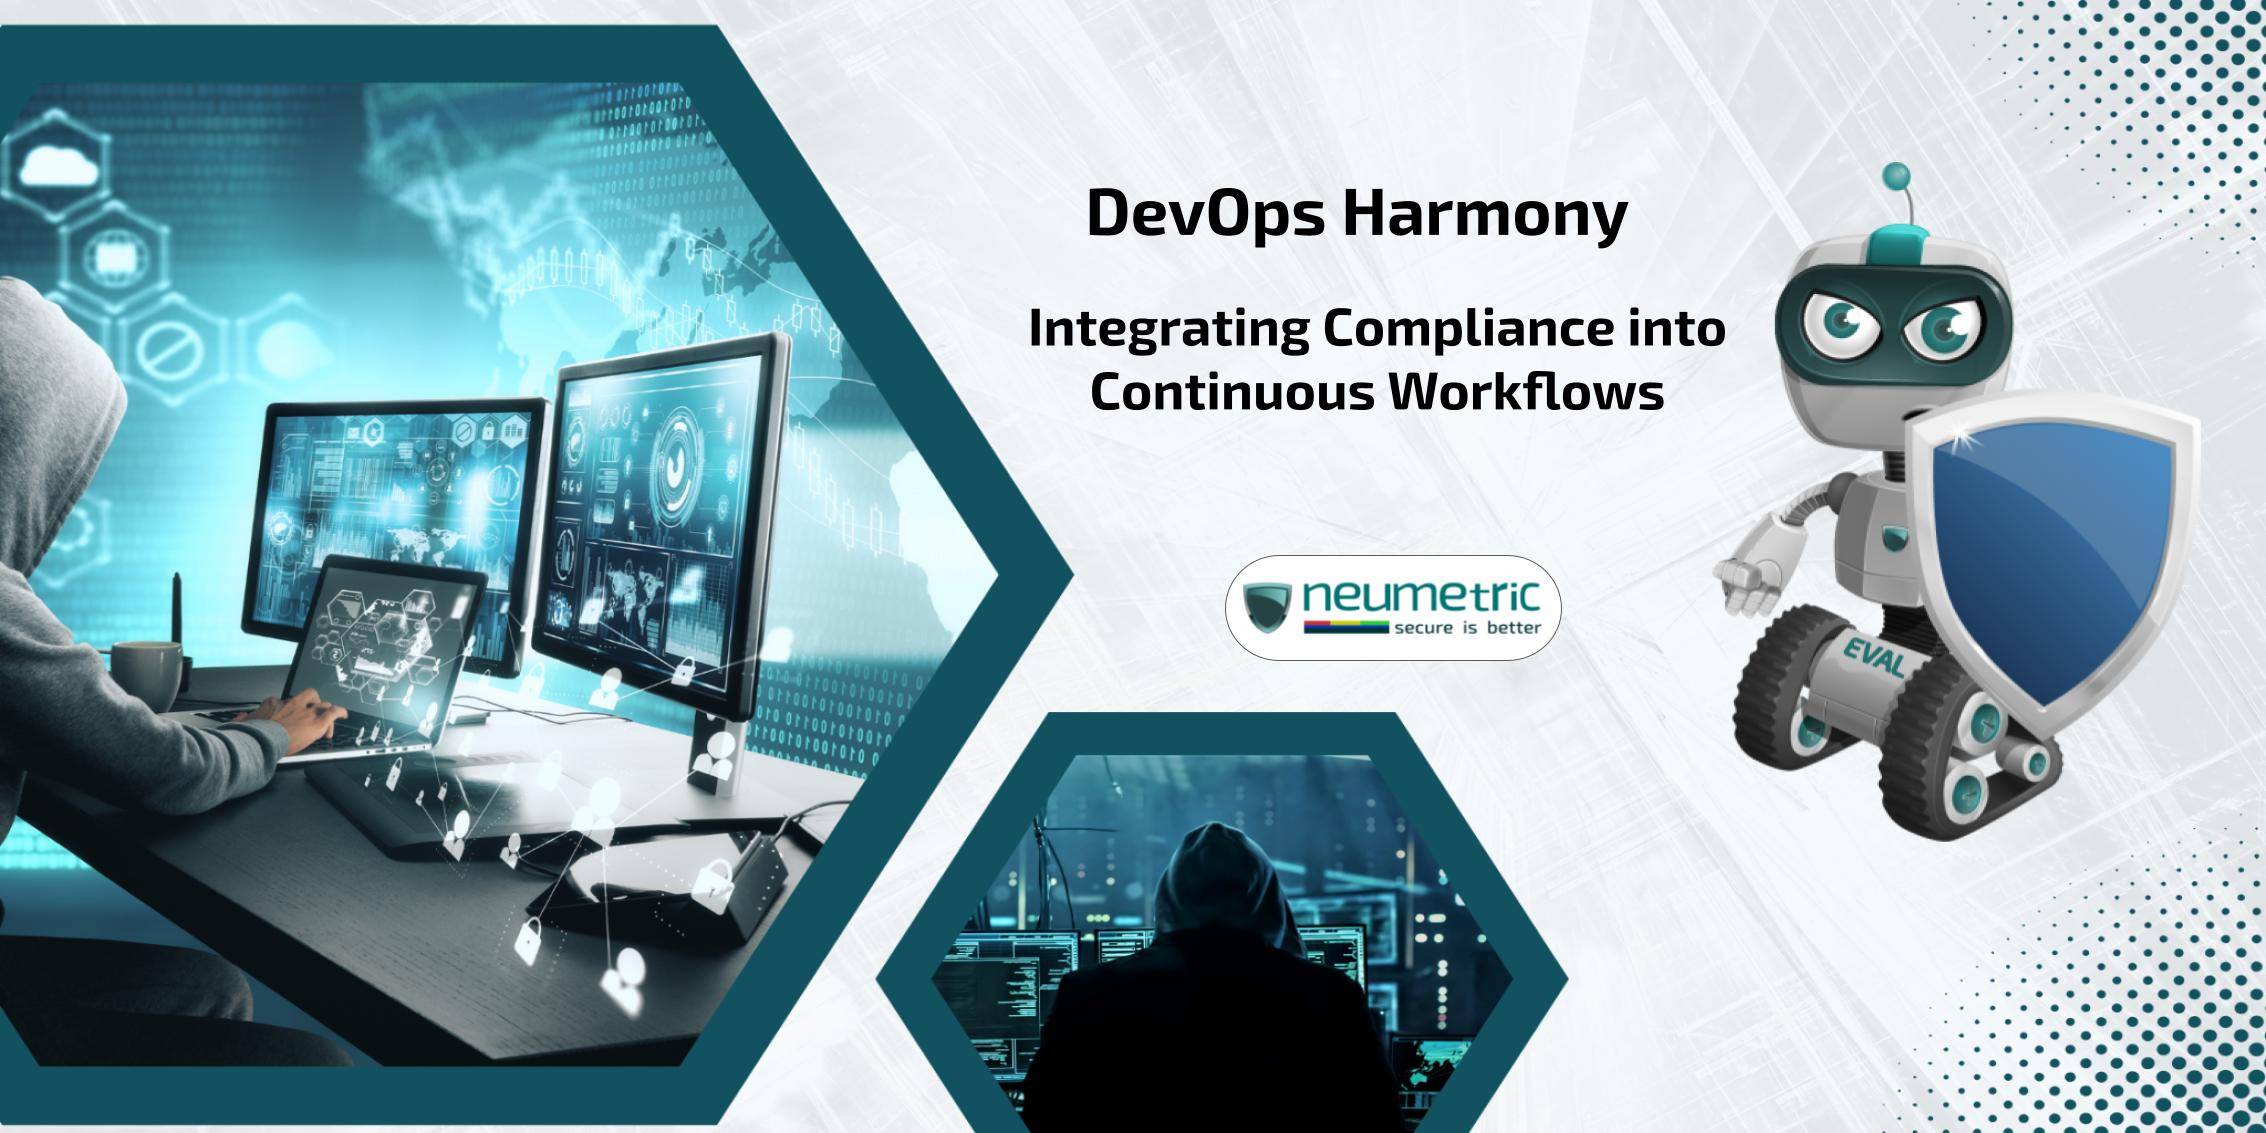 DevOps Harmony: Integrating Compliance into Continuous Workflows